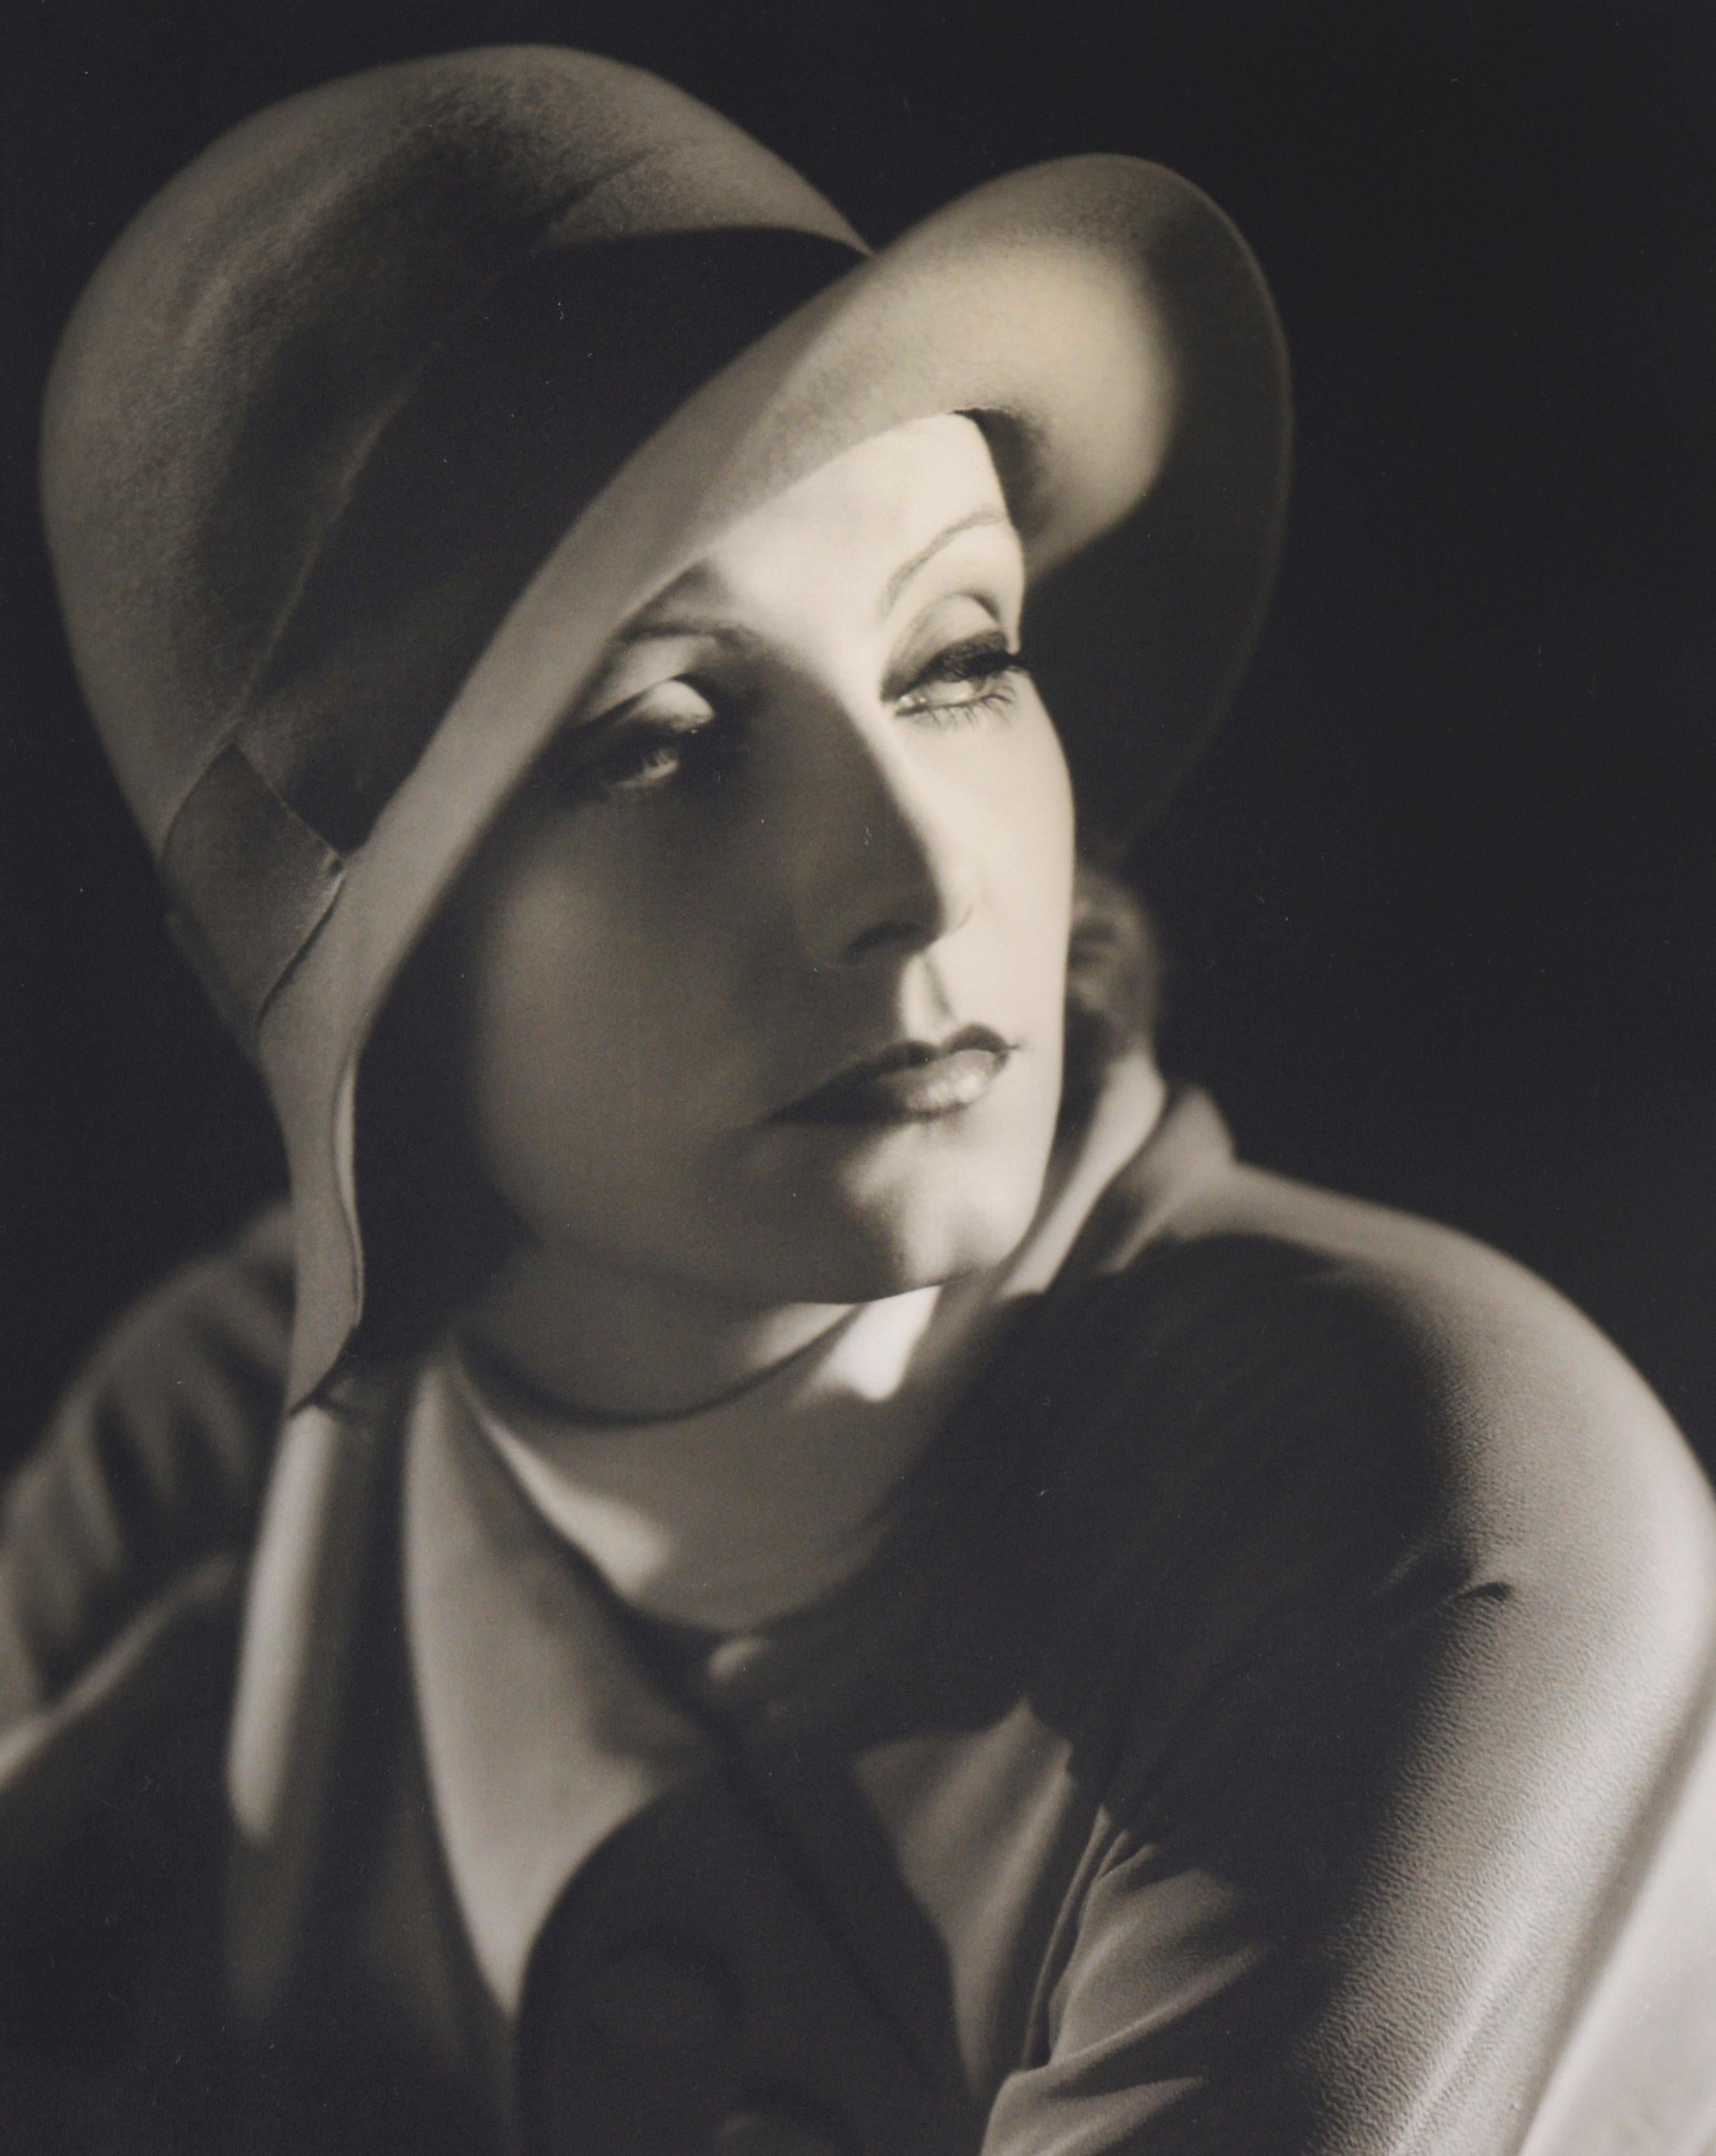 Greta Garbo - Black and White Photograph by Clarence Sinclair Bull, 1930 For Sale 3